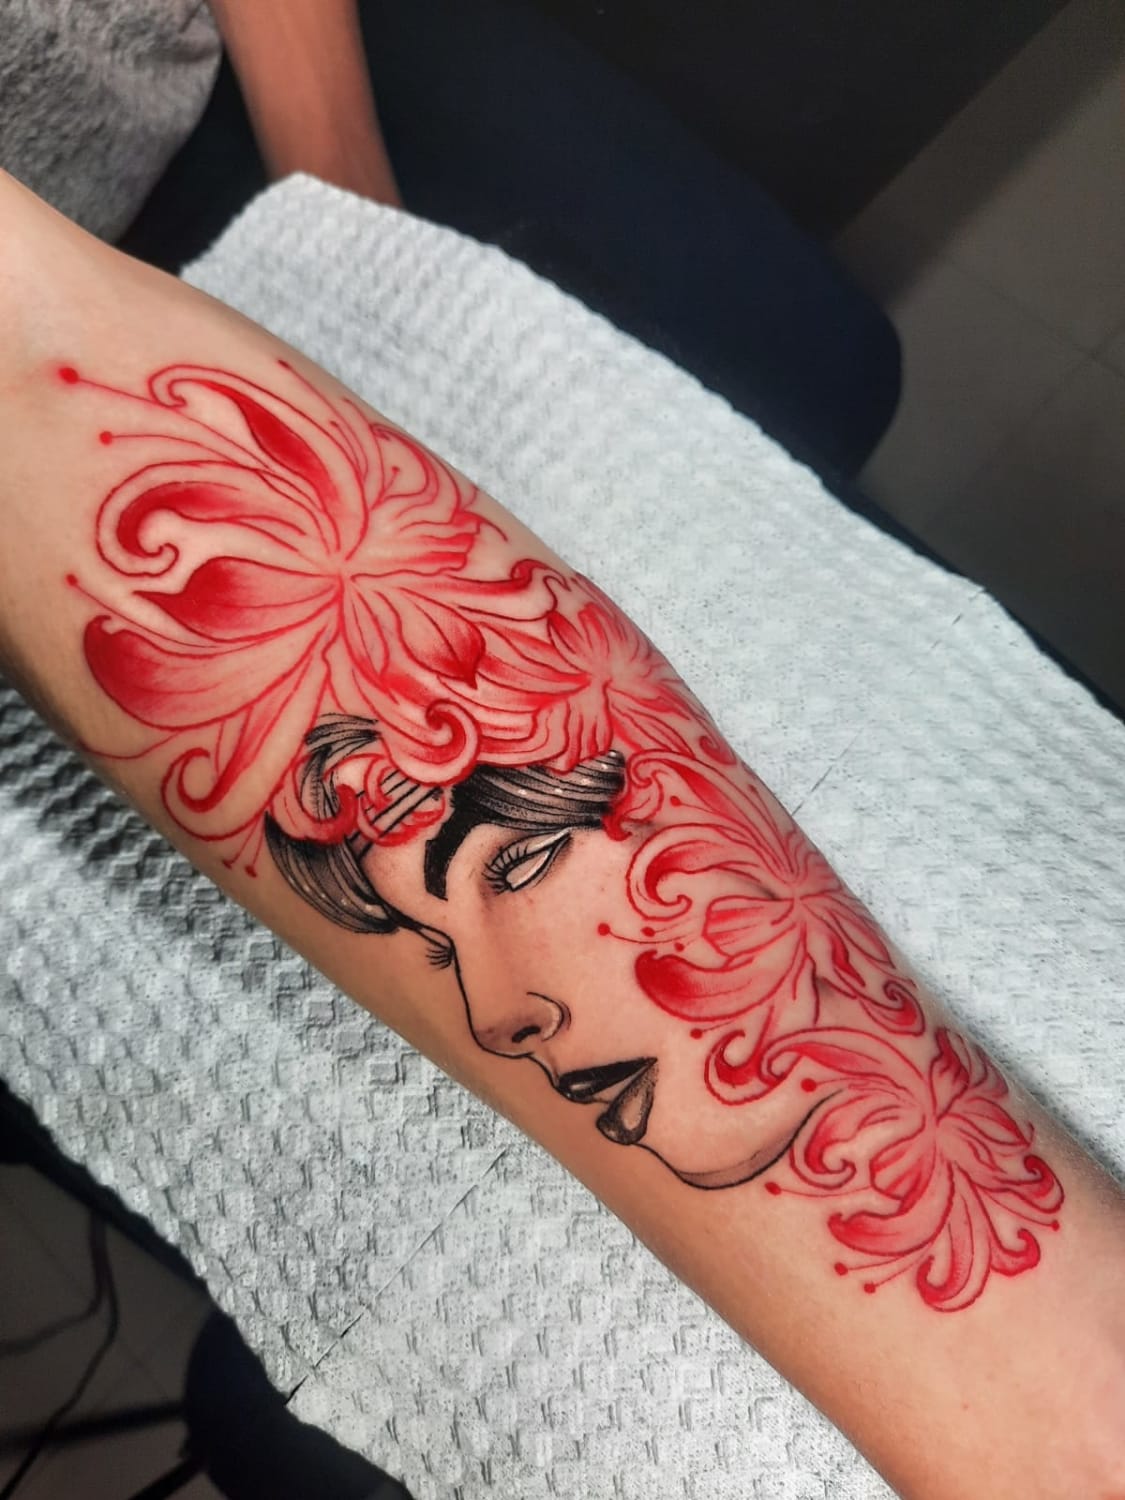 Forearm piece done by laura valencia at bestial ink studio on Bogota, Colombia.